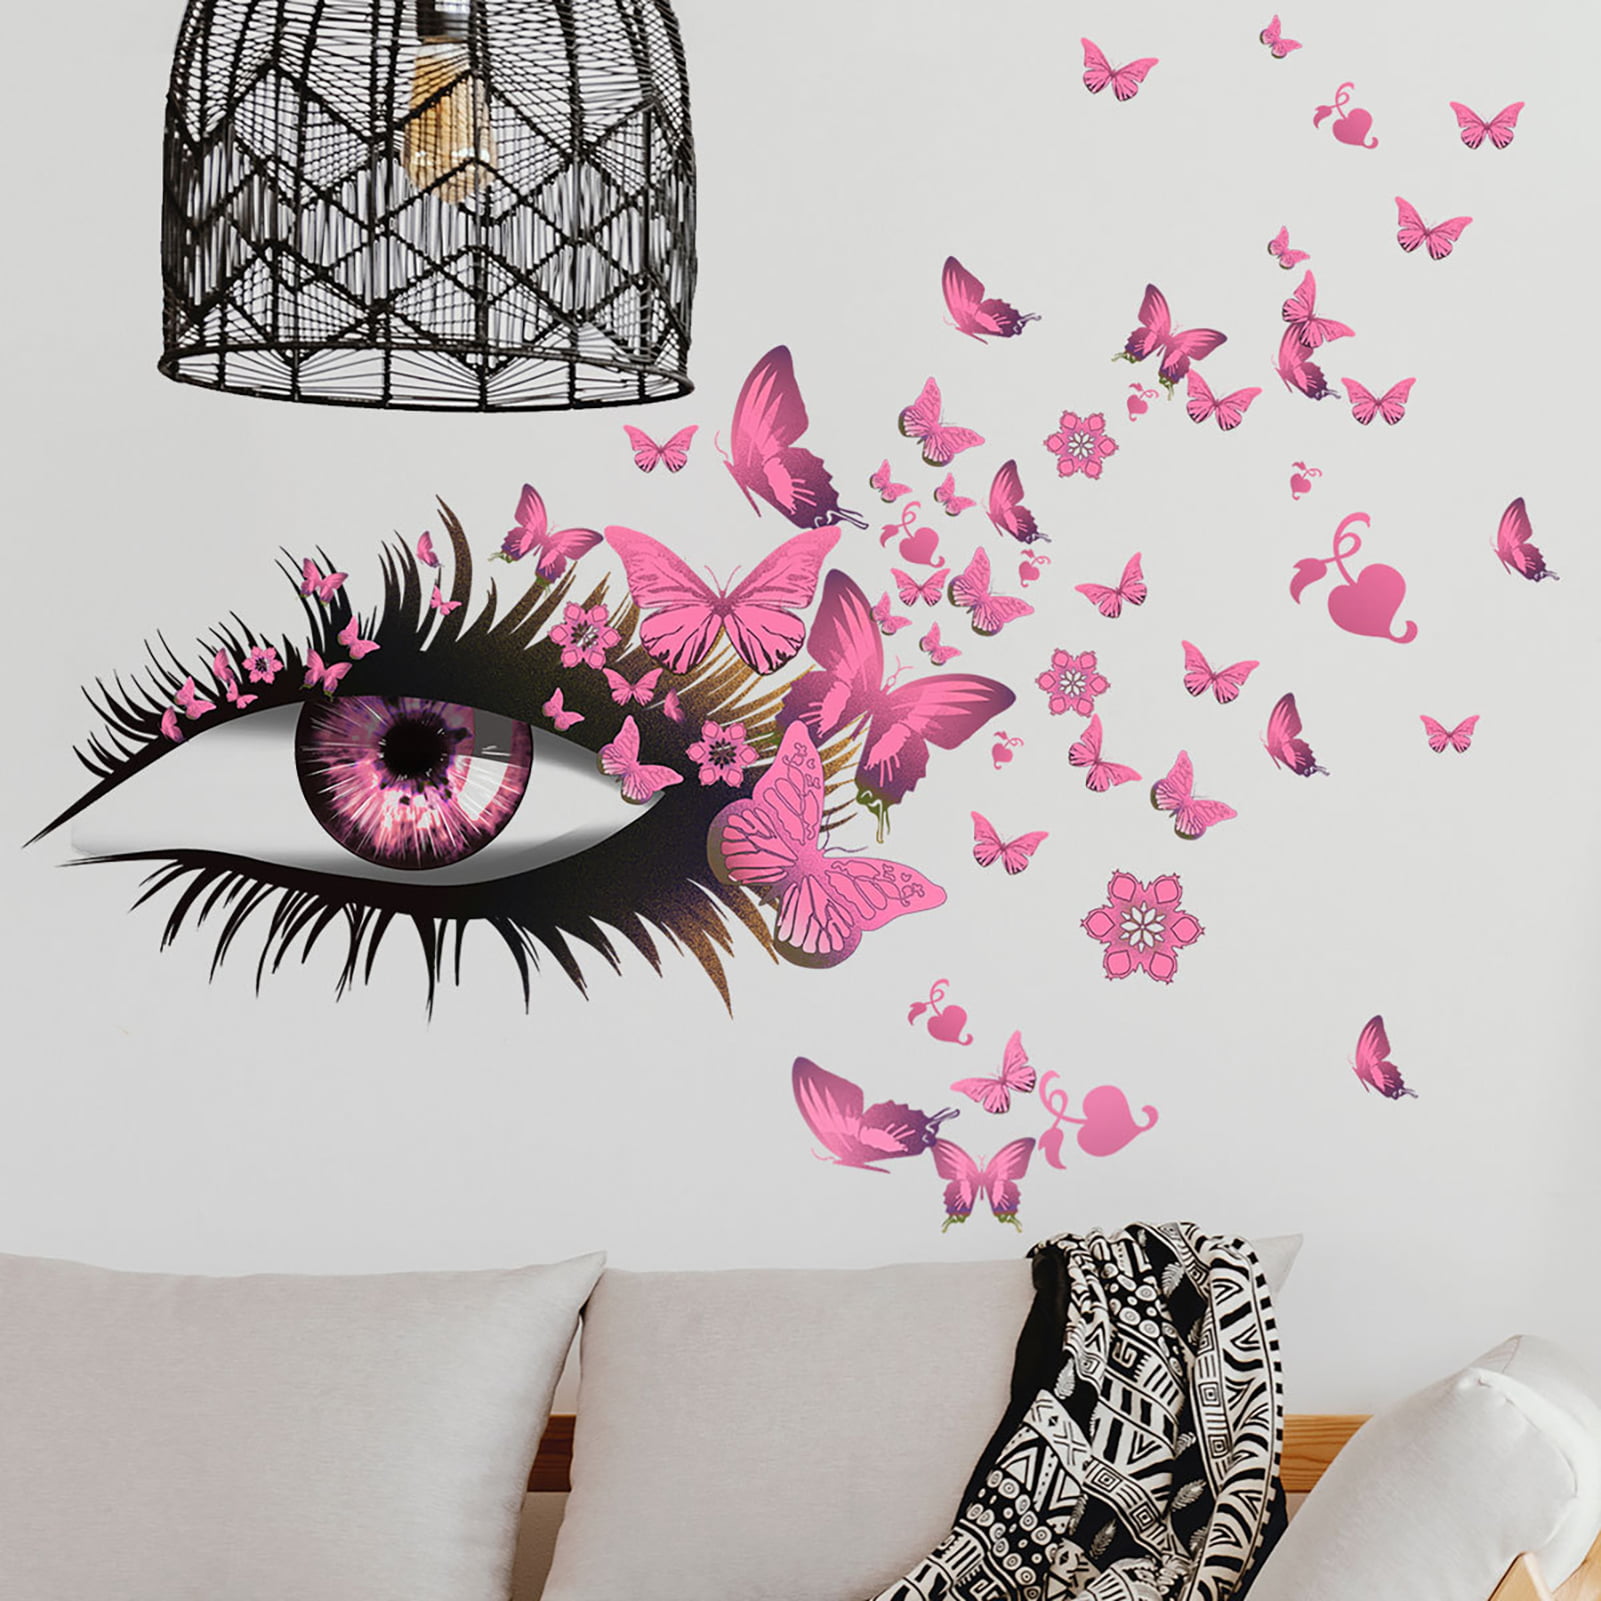 Lomubue 1 Sheet Wall Sticker Eye-catching Waterproof PVC 3D Butterfly Decals  Background Decorative Stickers for Home 